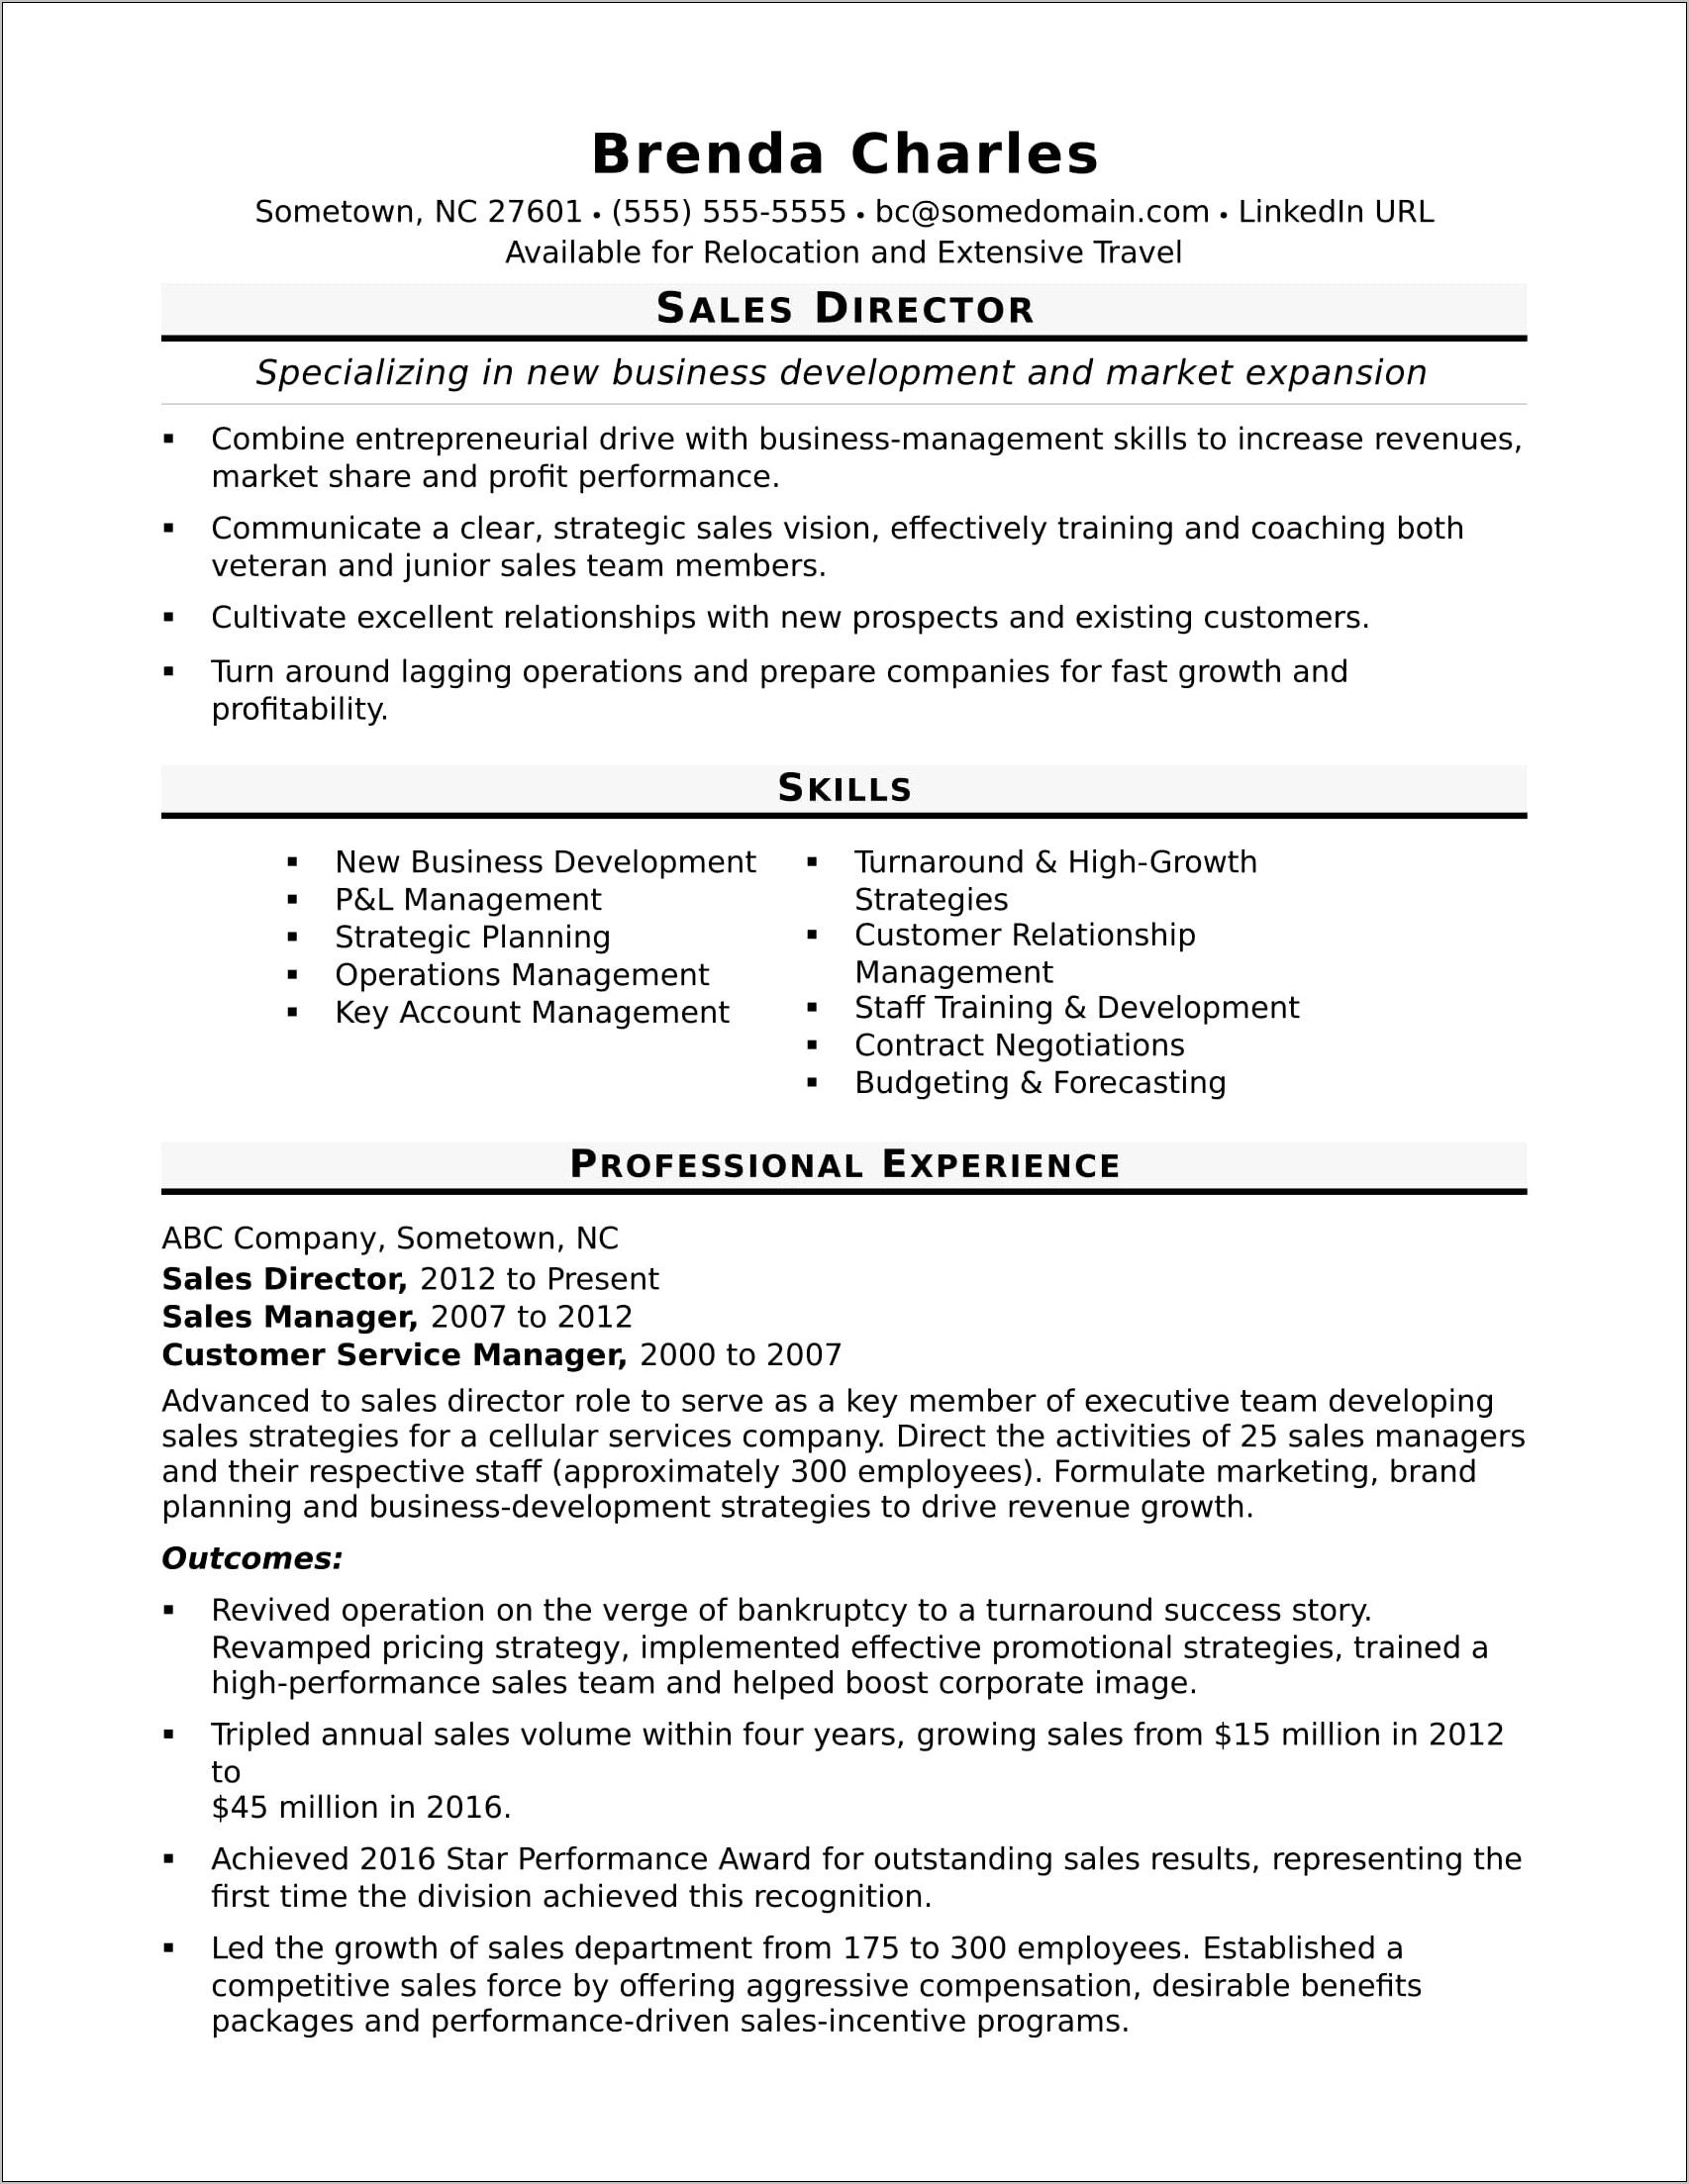 Sample Resume For Sales Executive Word Format